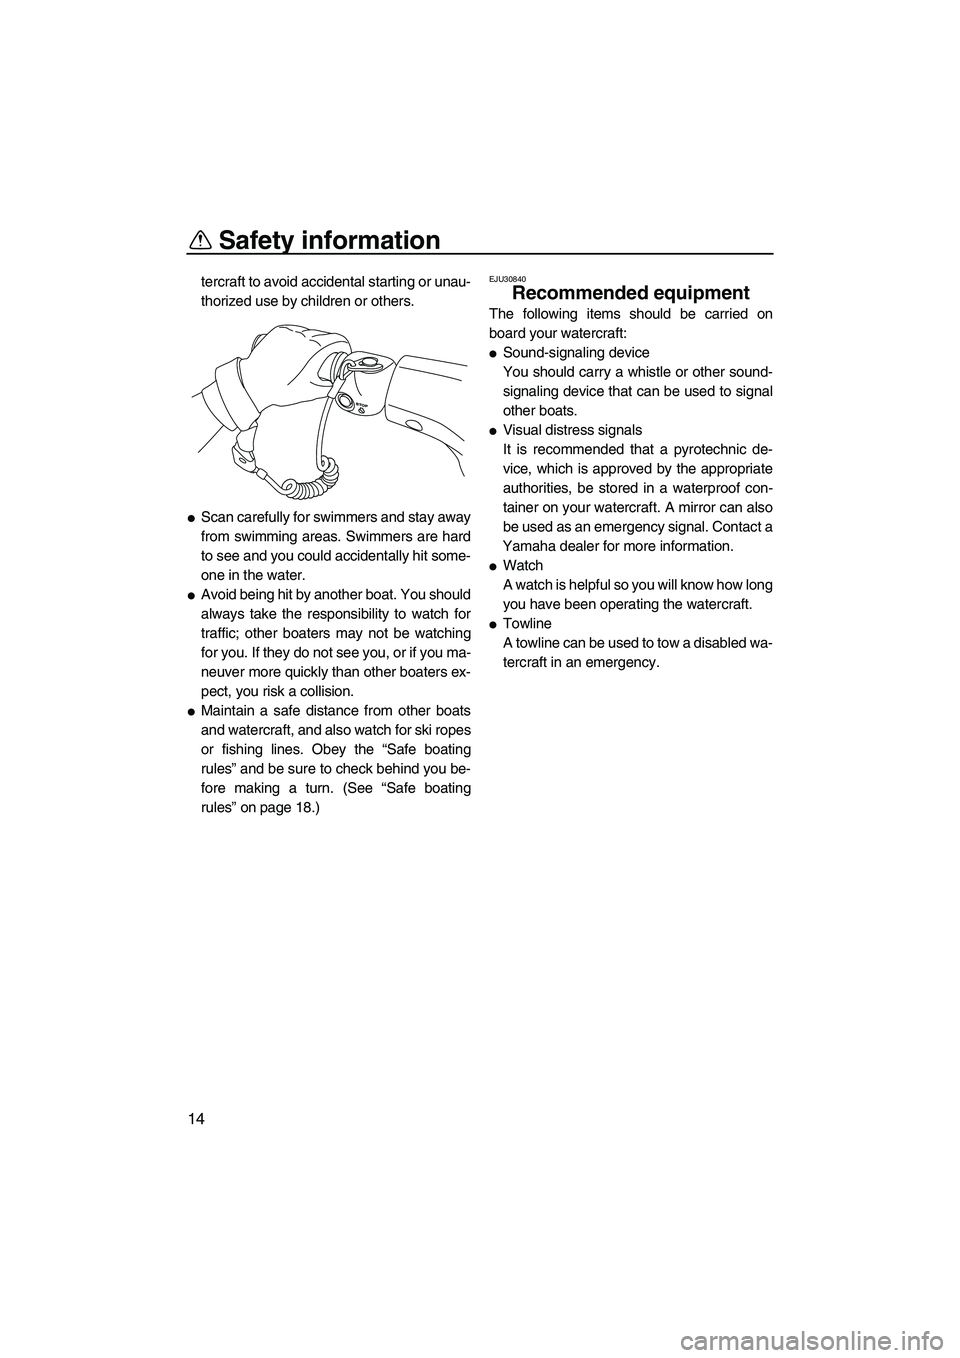 YAMAHA VXS 2012  Owners Manual Safety information
14
tercraft to avoid accidental starting or unau-
thorized use by children or others.
Scan carefully for swimmers and stay away
from swimming areas. Swimmers are hard
to see and yo